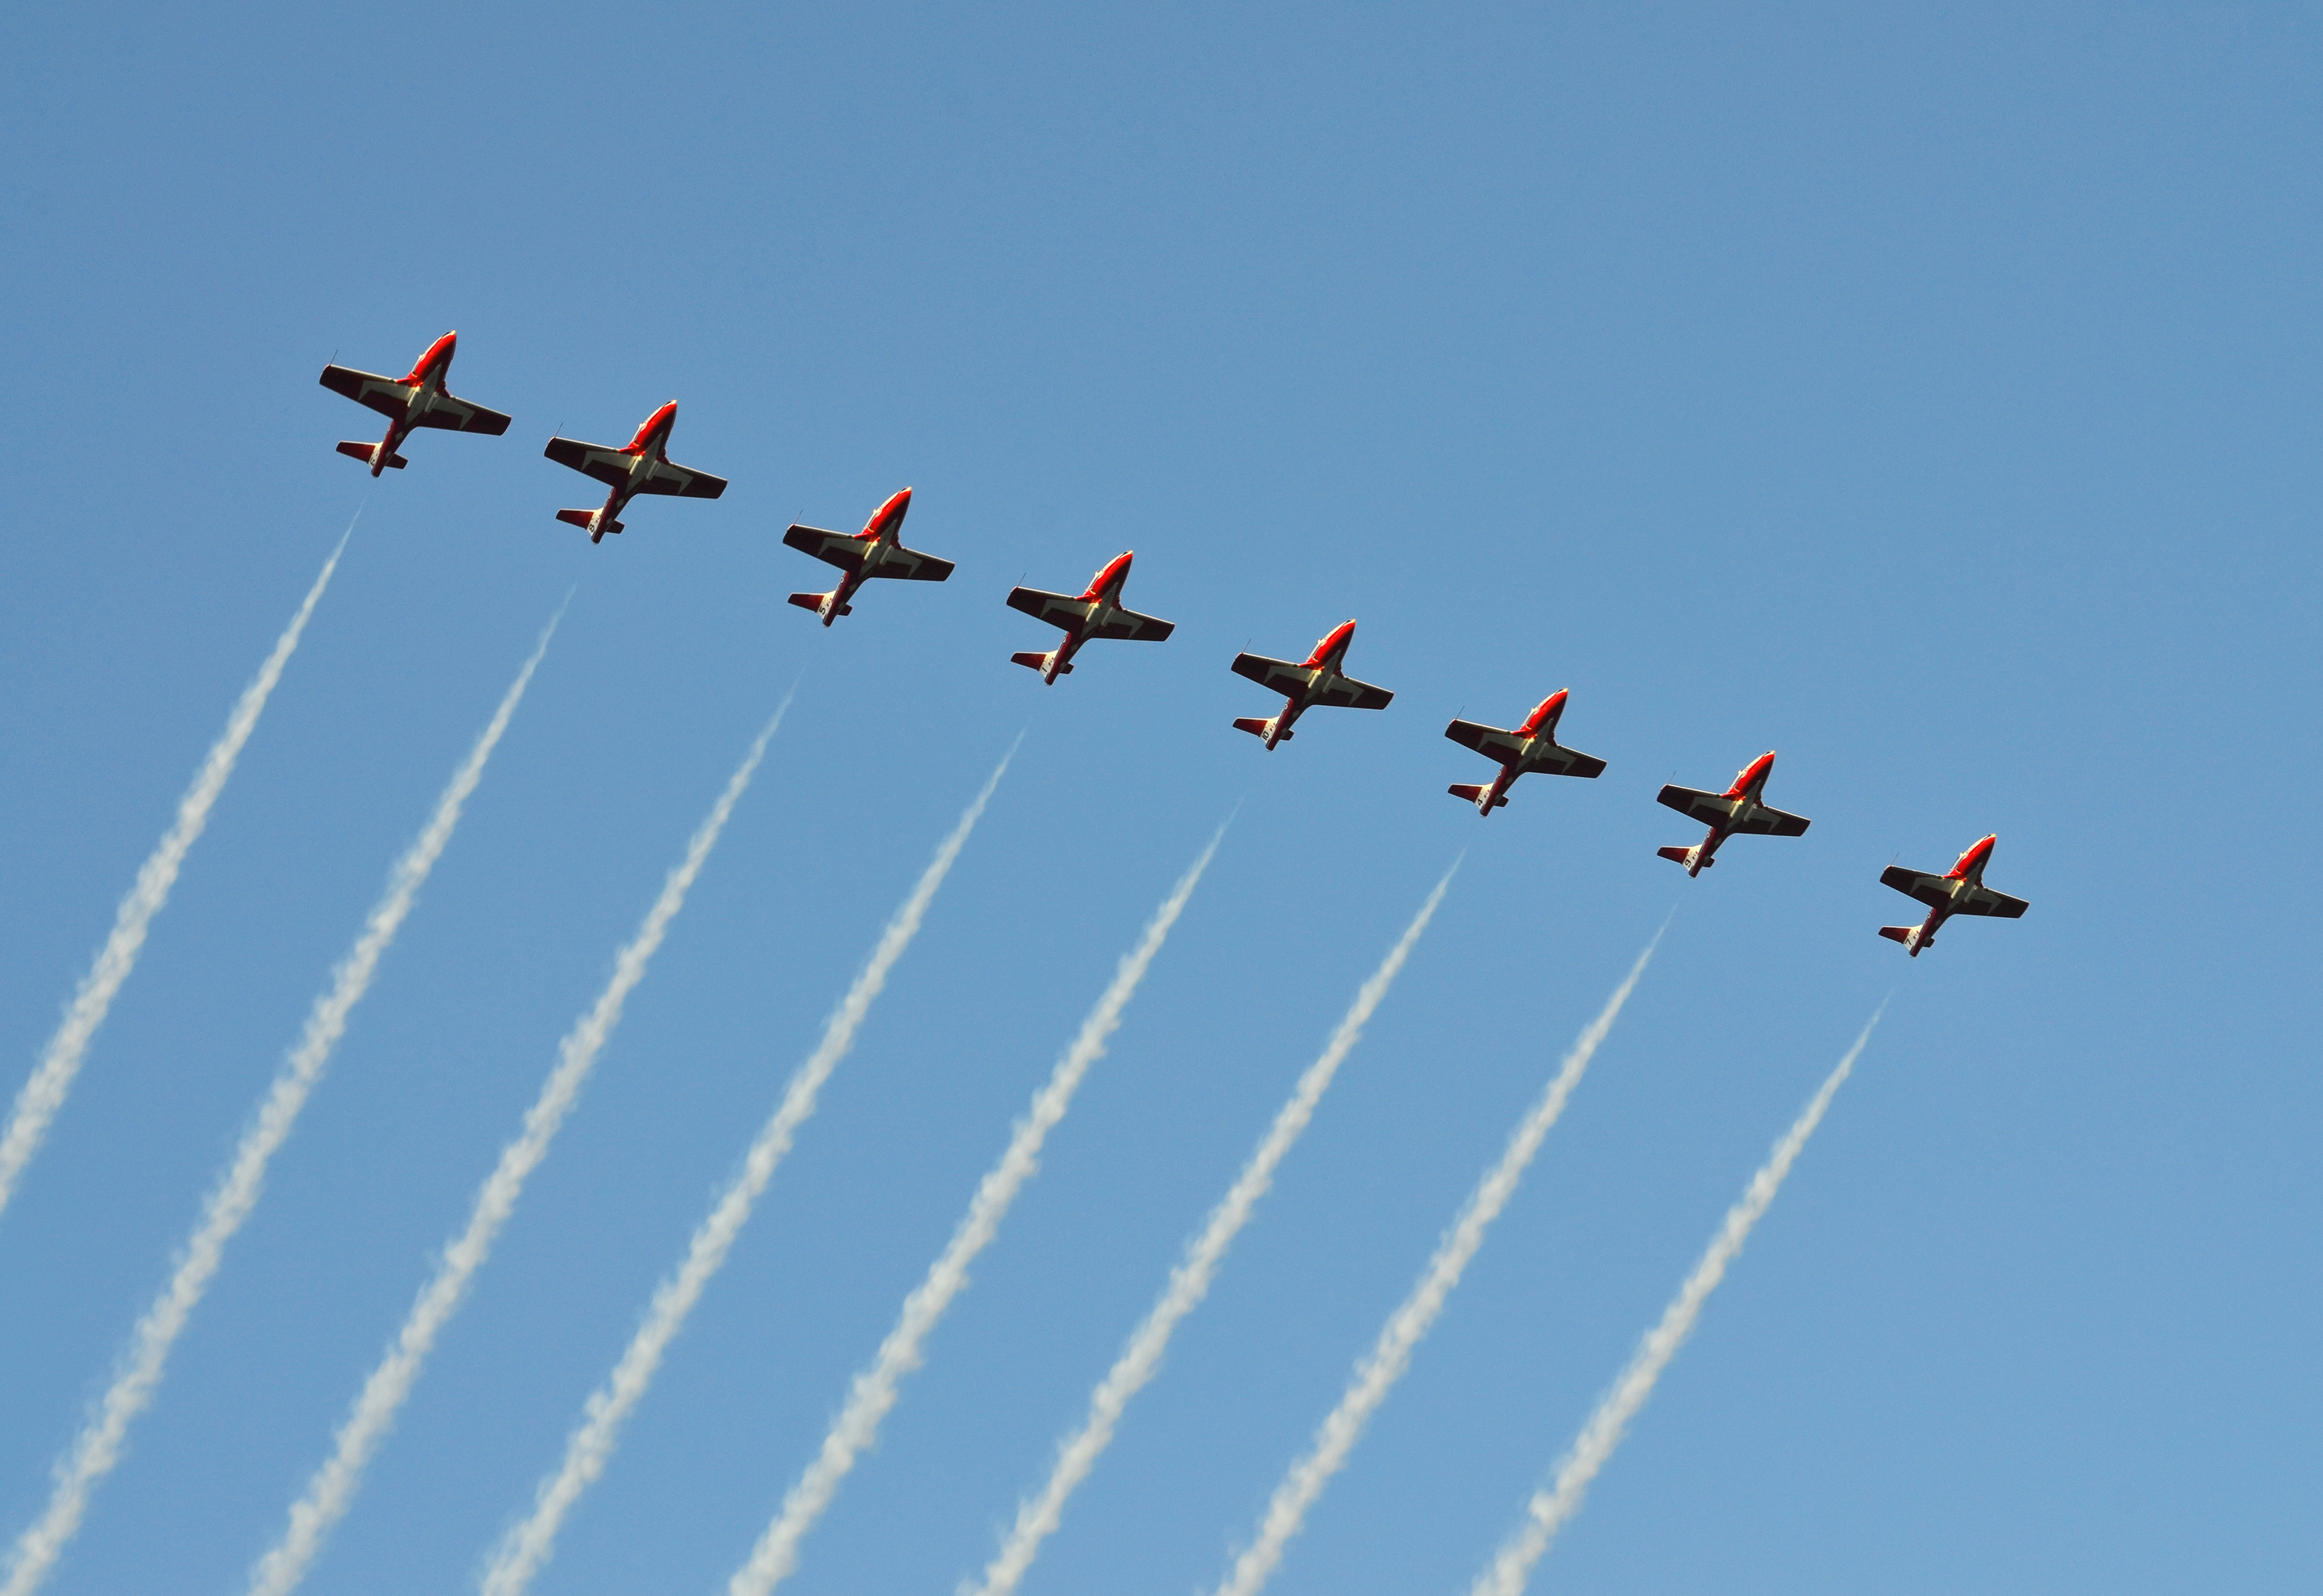 Grand Forks airshow nears - My Grand Forks Now